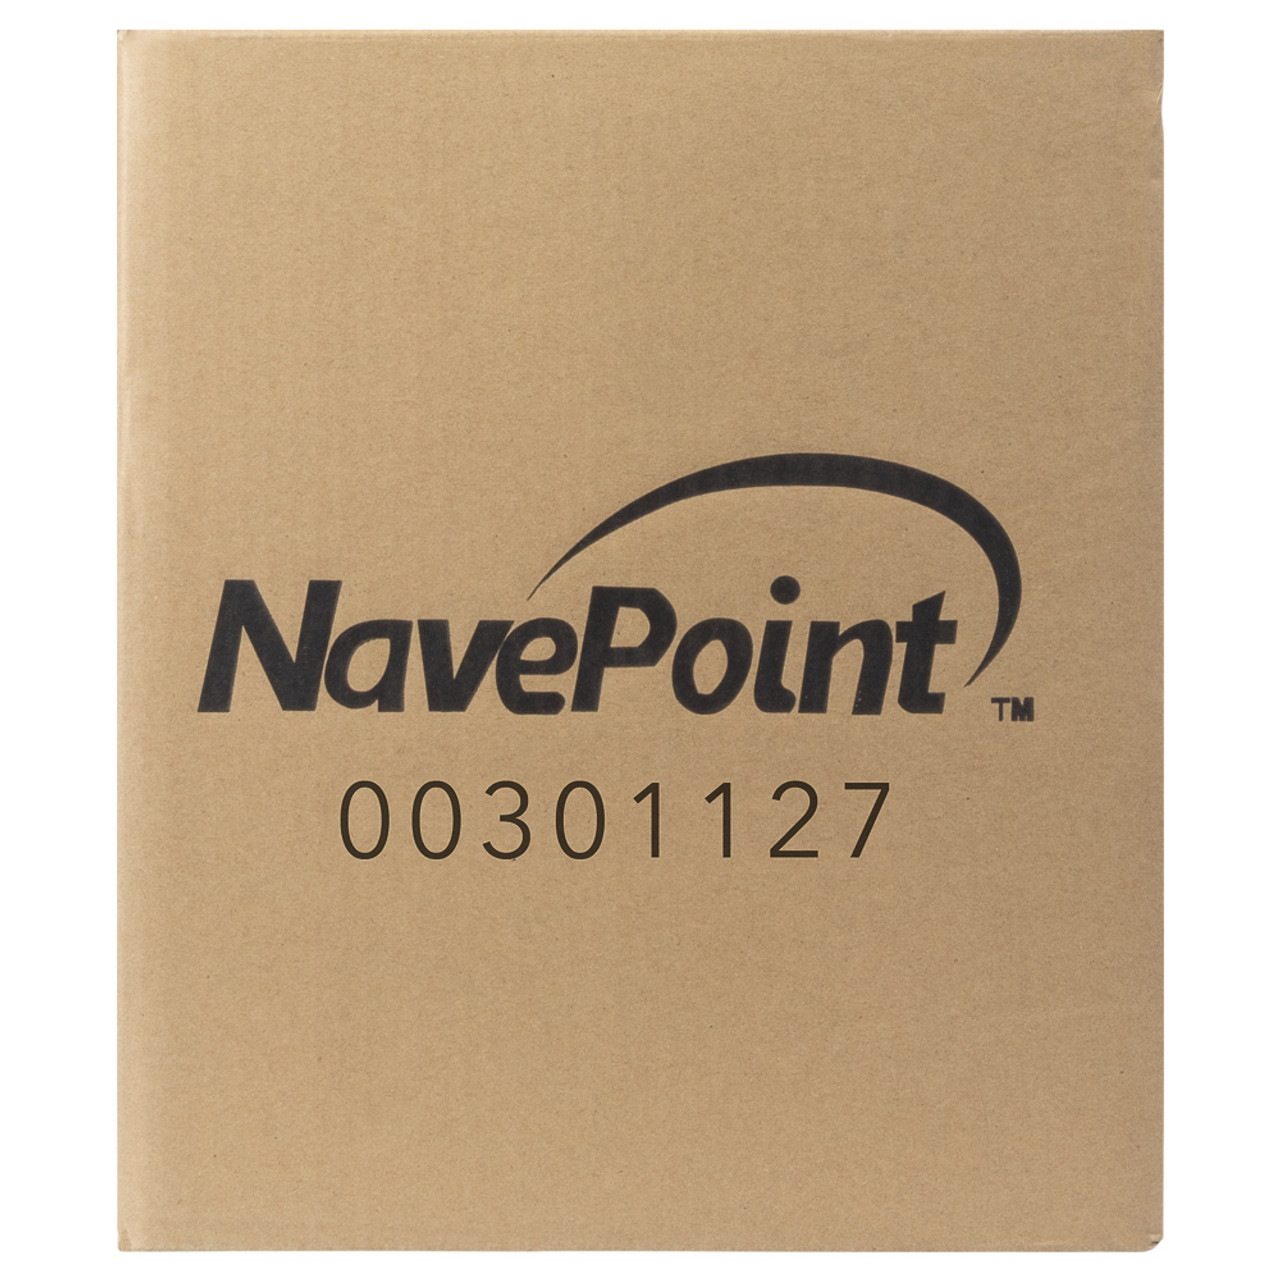 NavePoint CAT6 UTP Outdoor Direct Burial HDPE Ethernet Cable 500 Ft Black